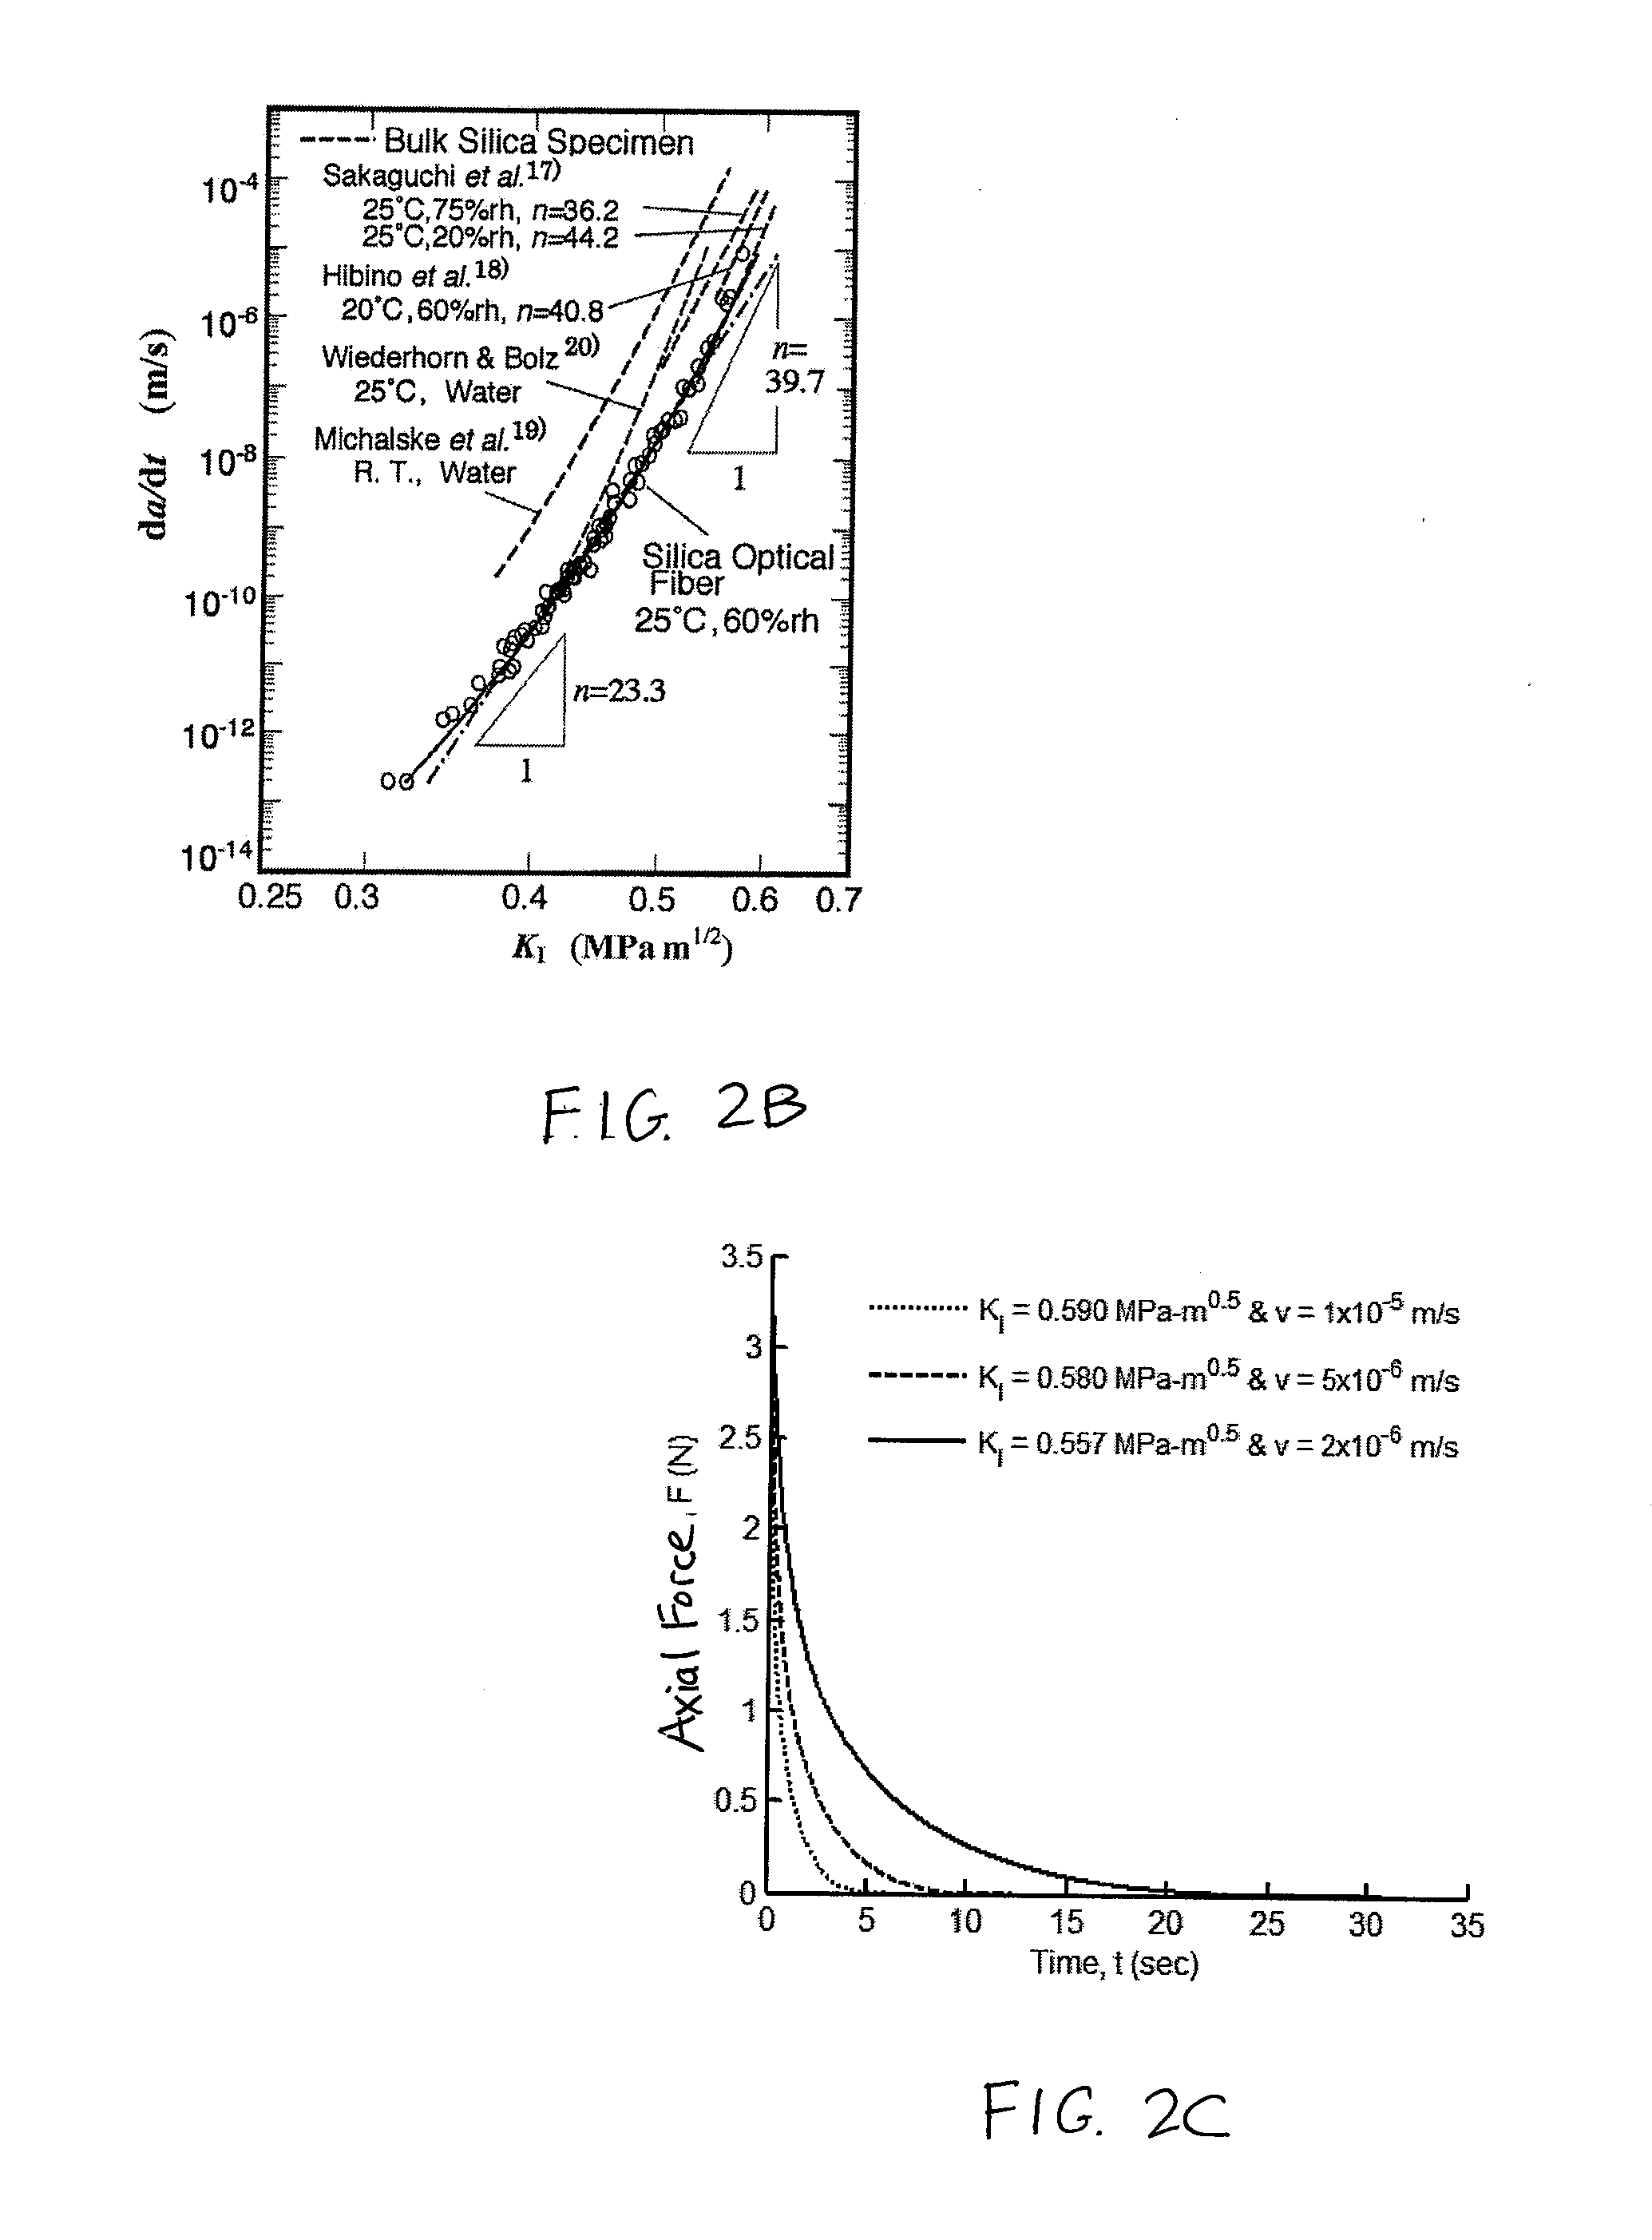 Tensioning device having a flexure mechanism for applying axial tension to cleave an optical fiber